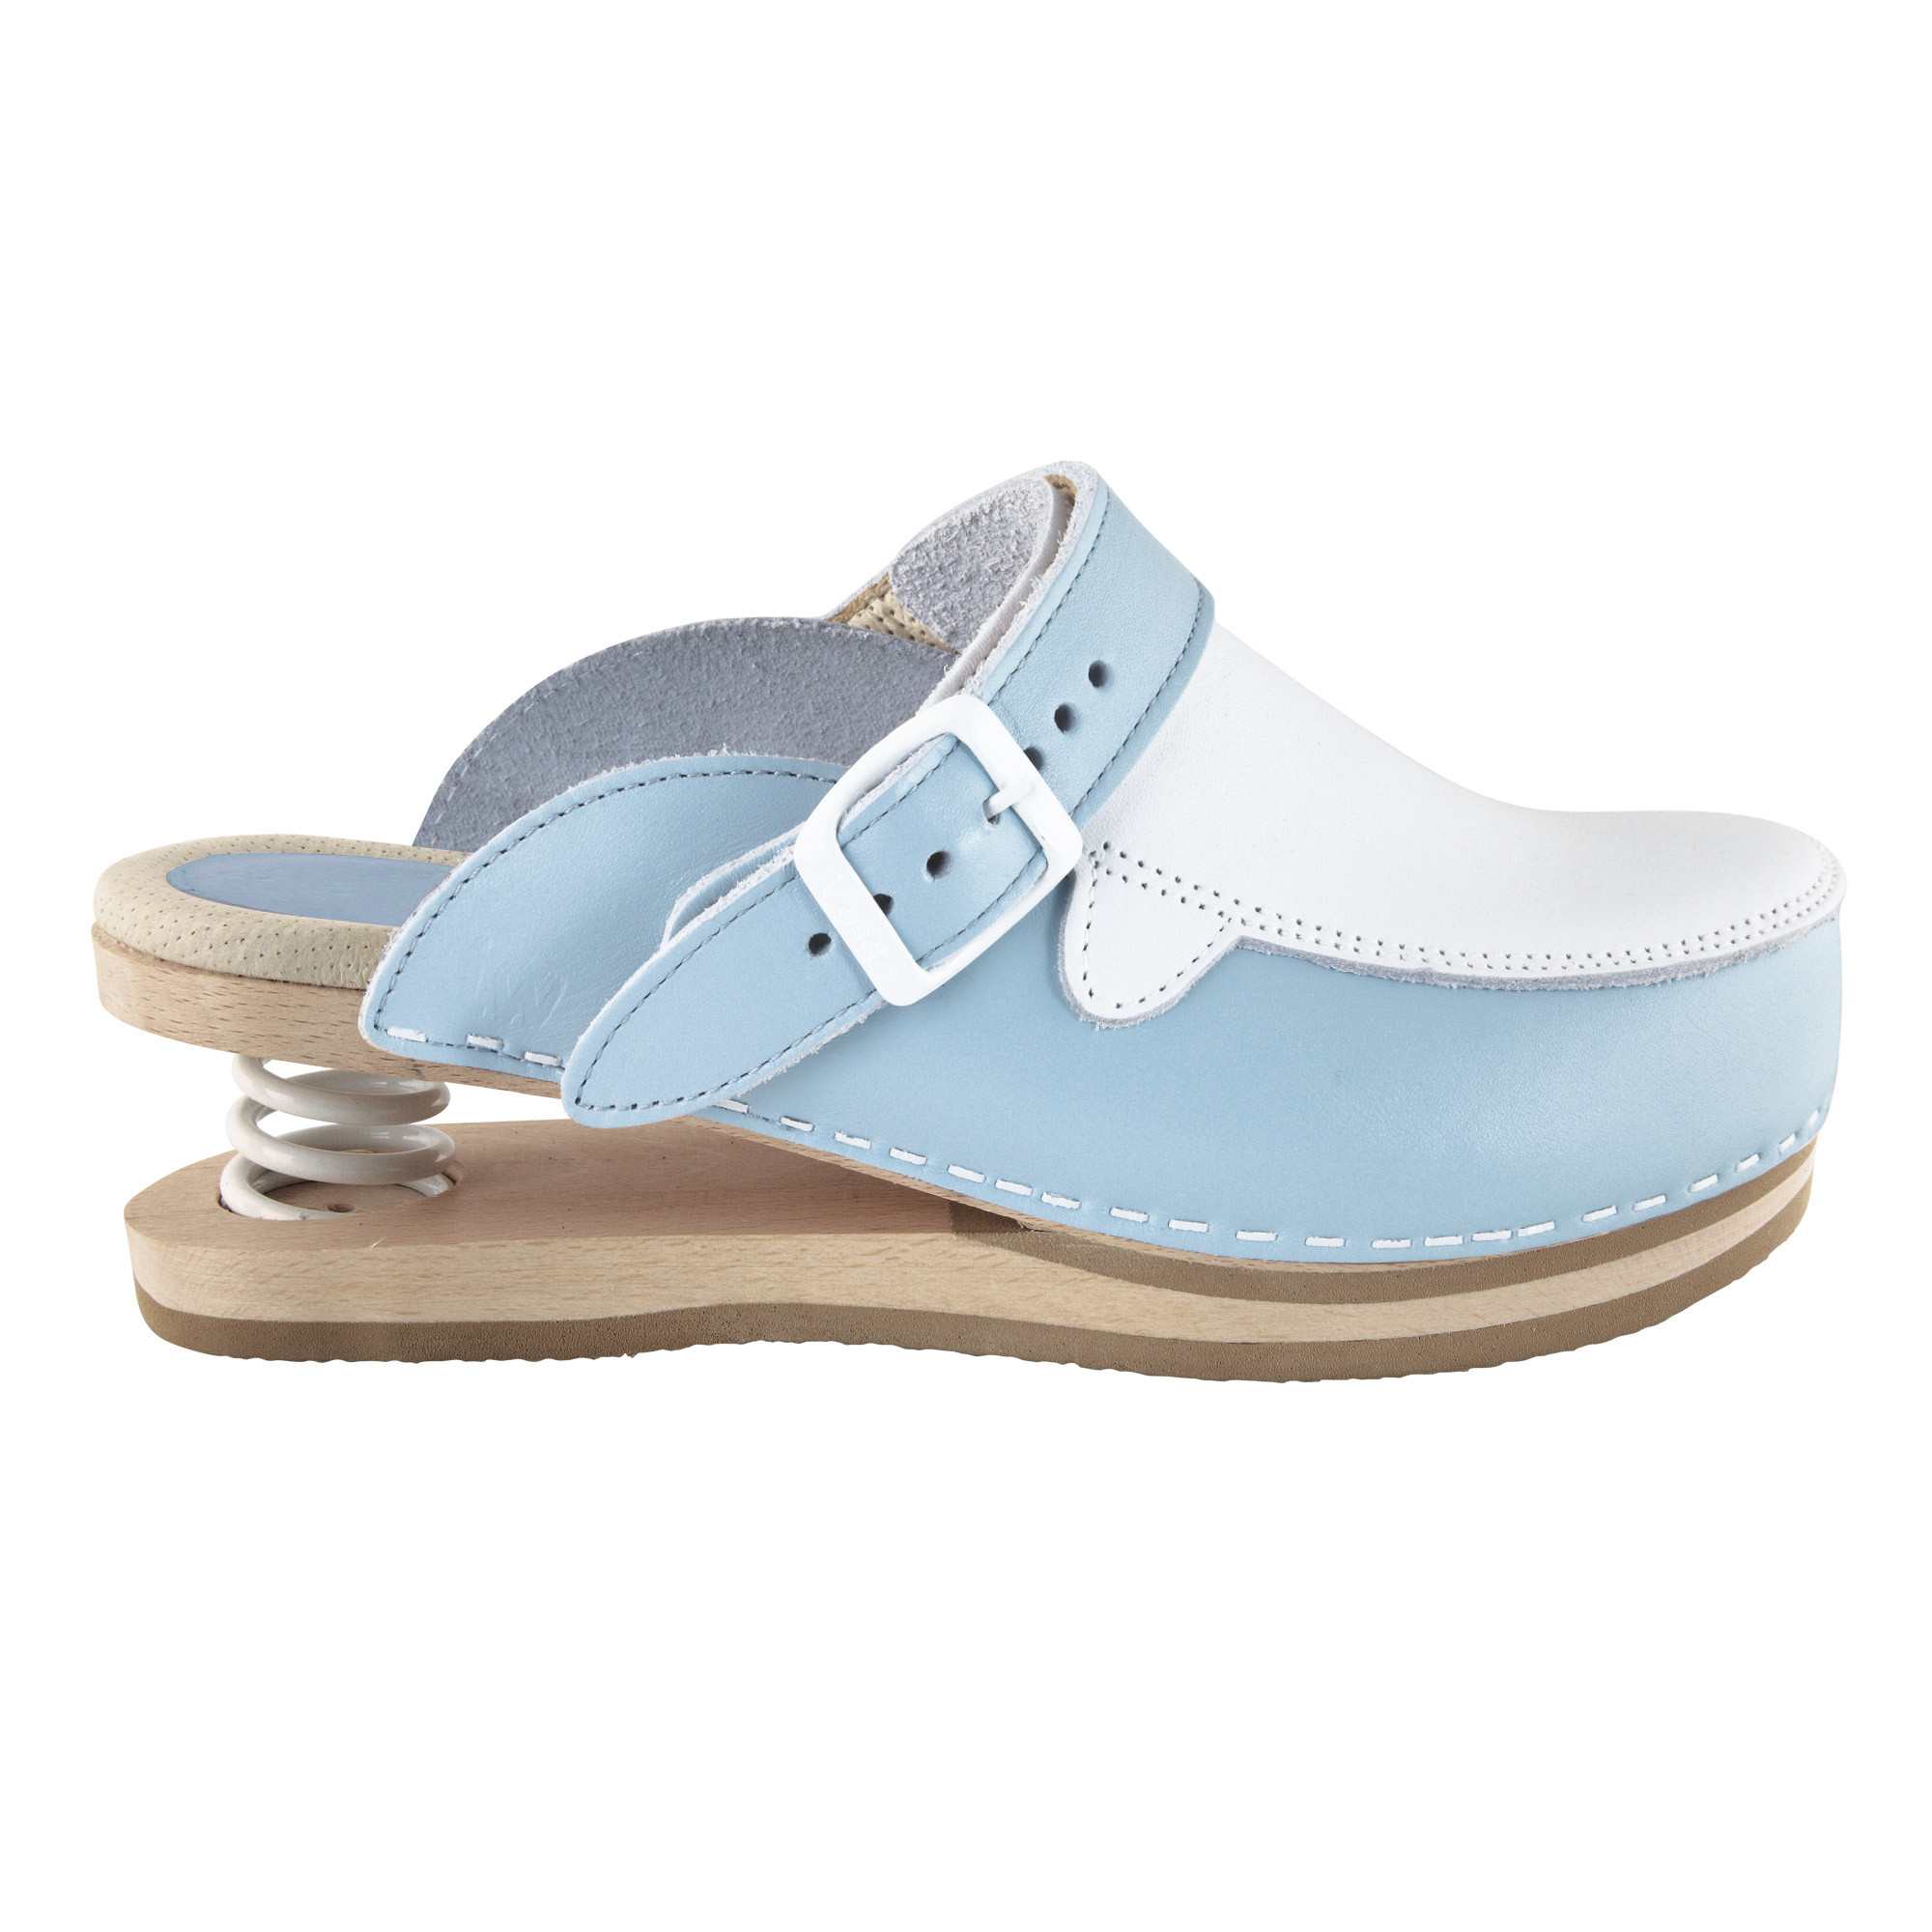 Relax clogs closed with light blue spring Size 39